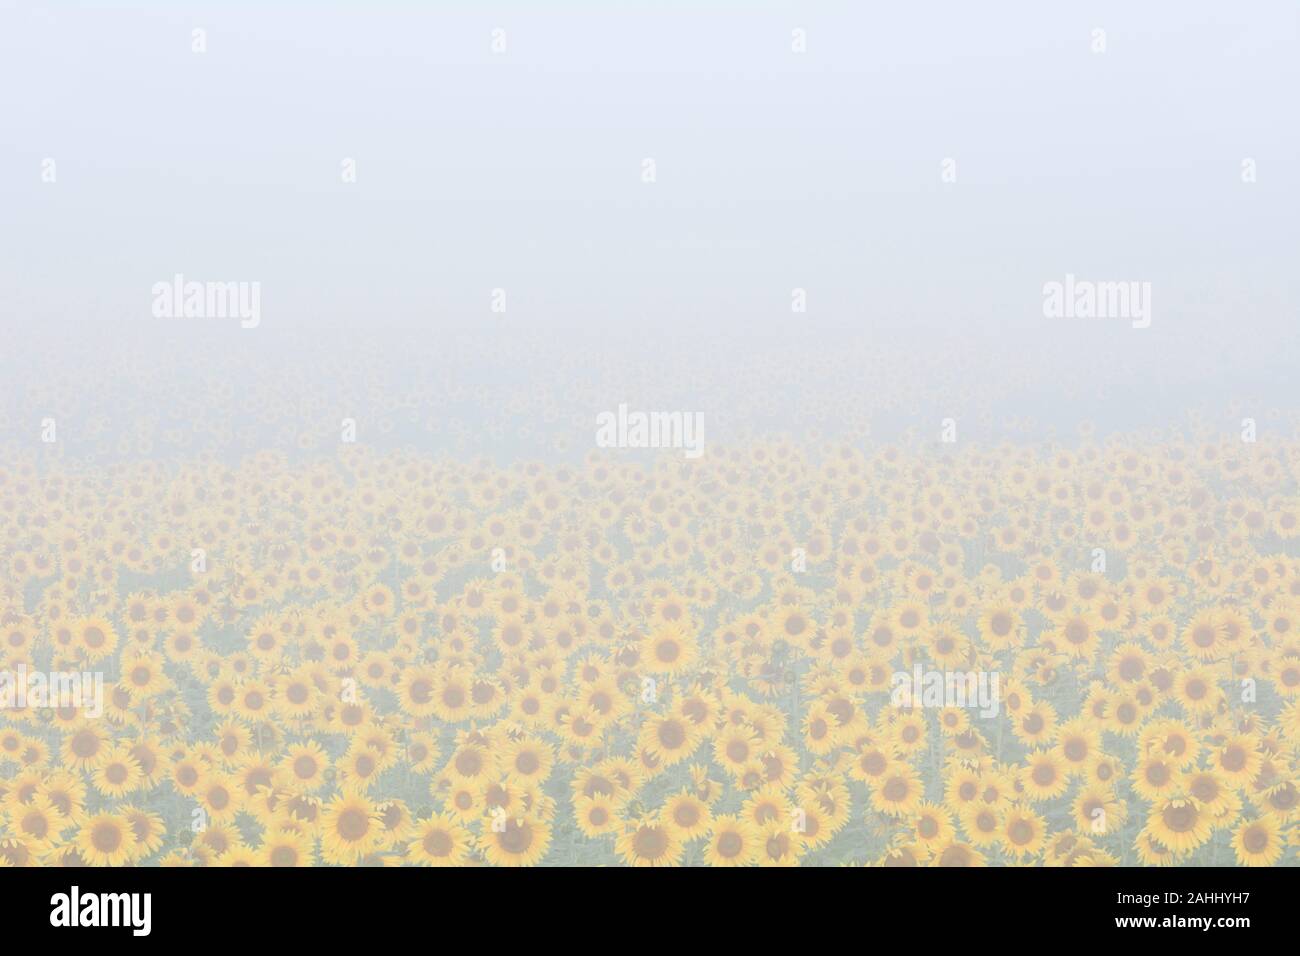 Sunflower field with lifting fog in Harford County, Maryland. Stock Photo